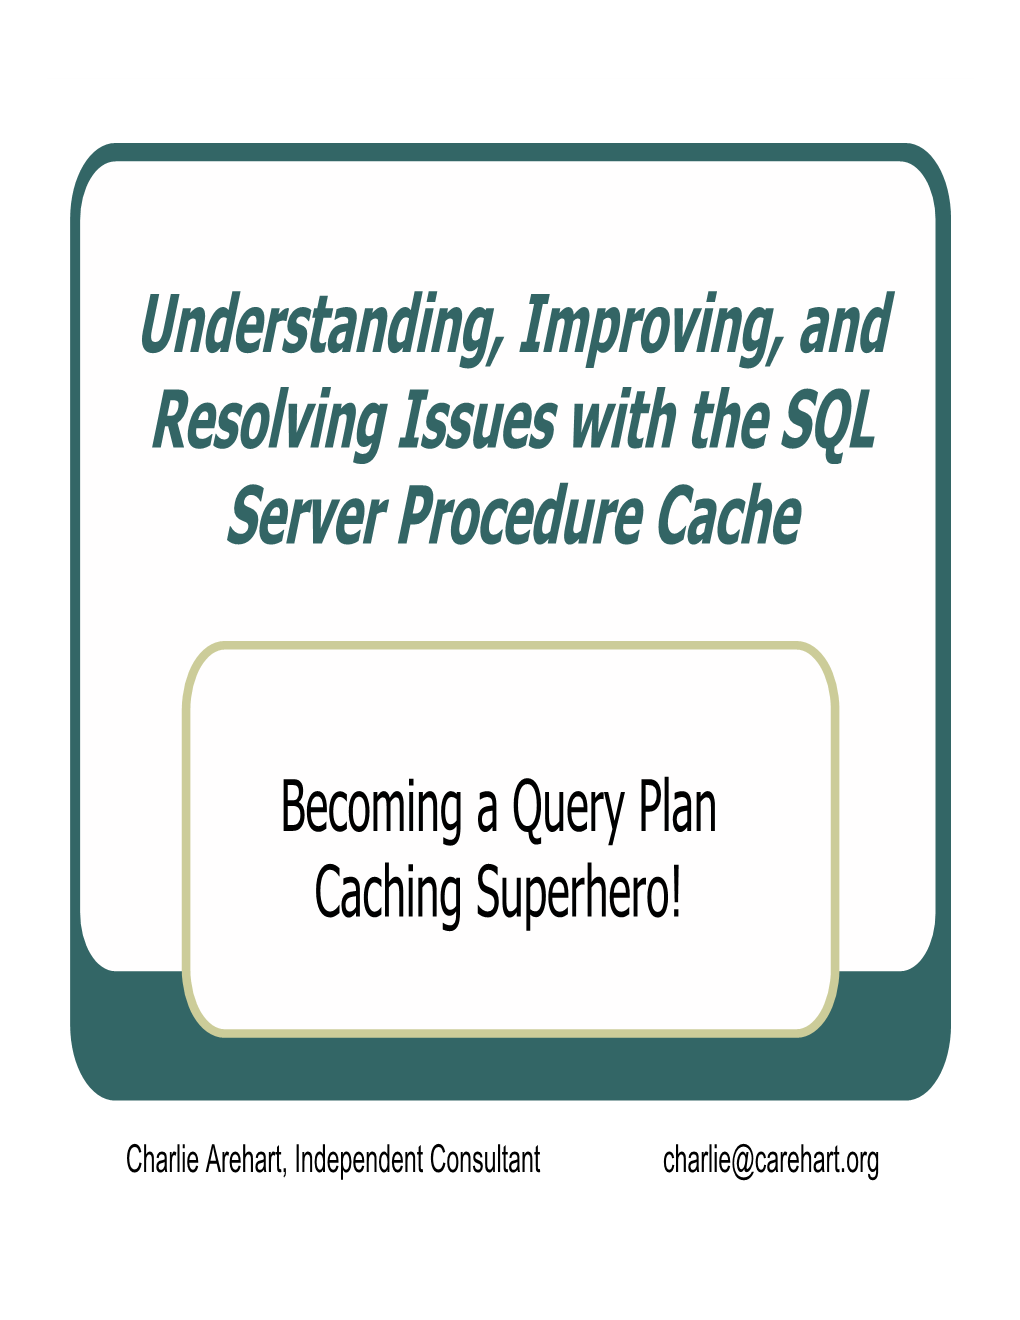 Understanding, Improving, and Resolving Issues with the SQL